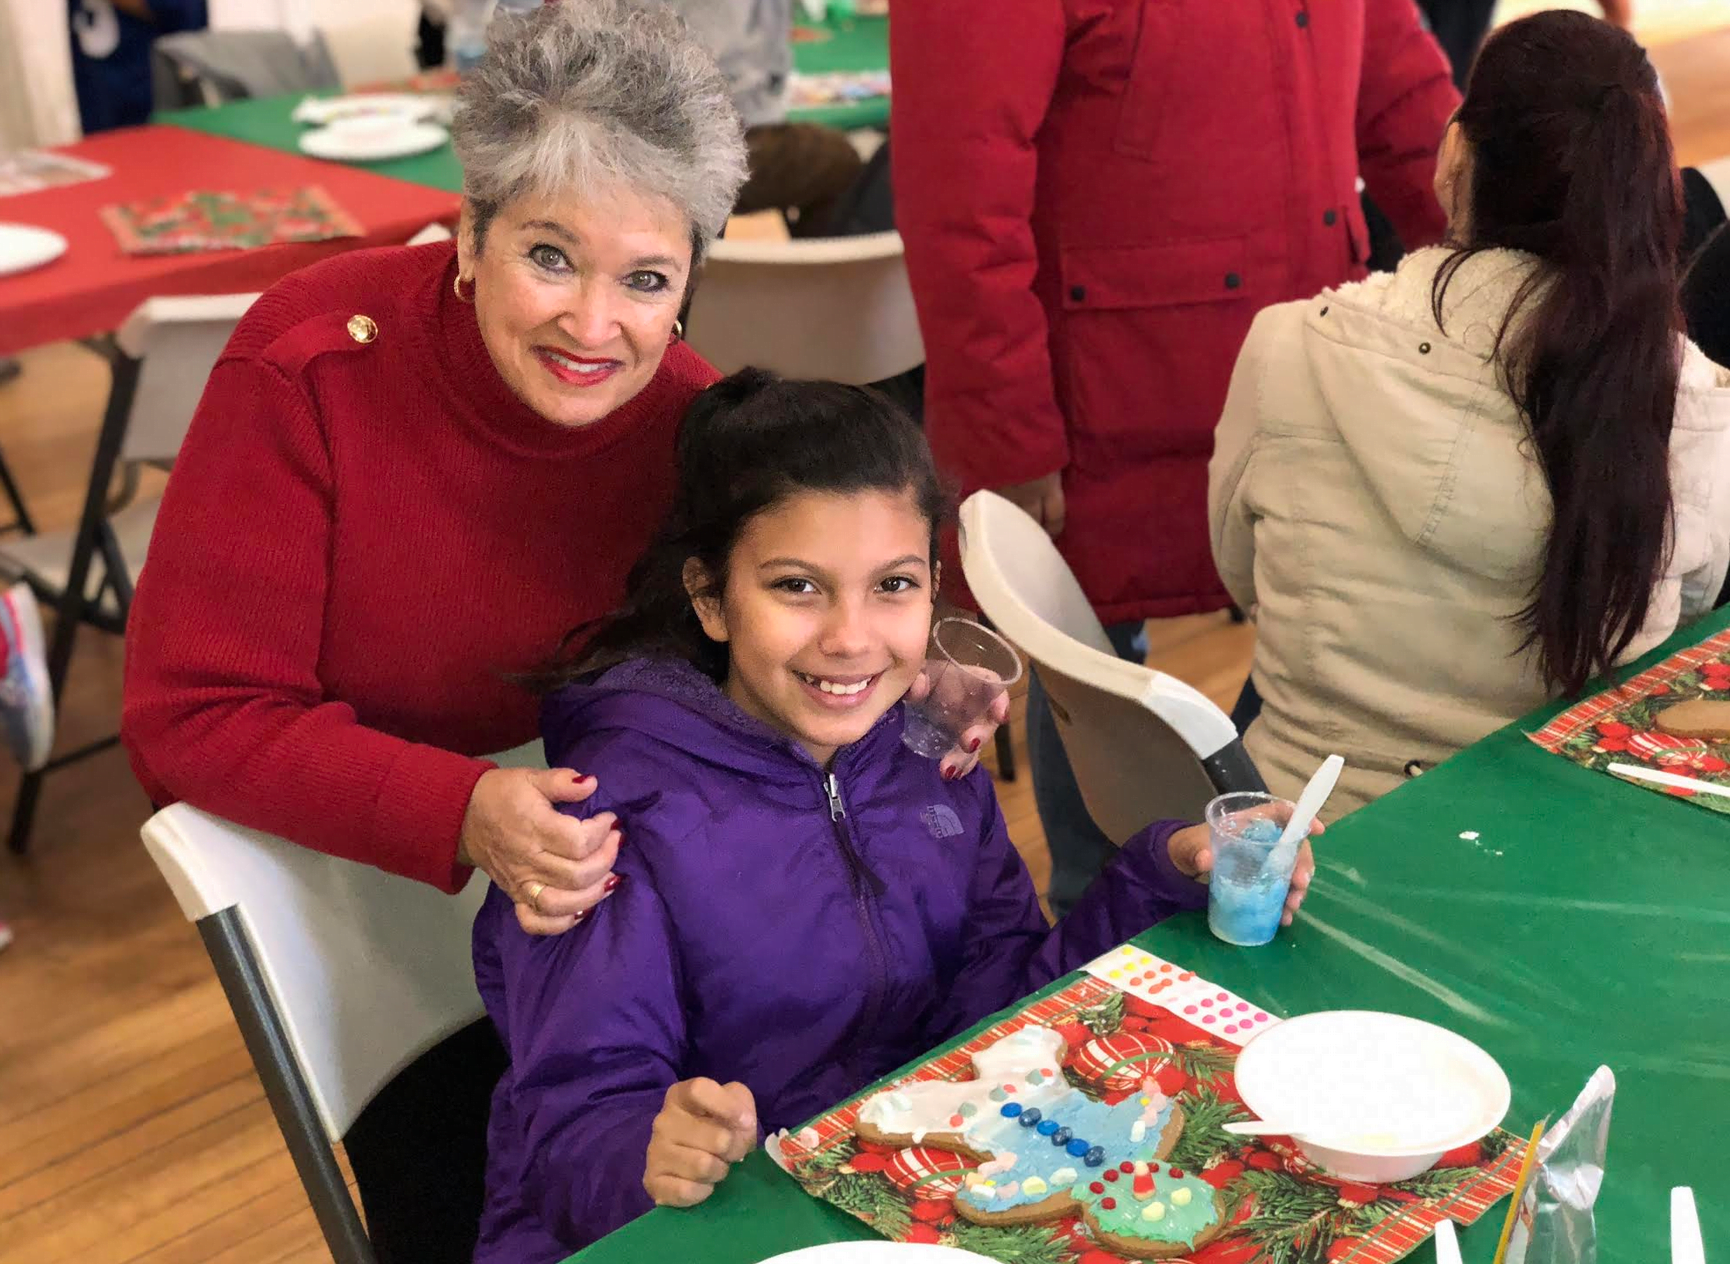 Kids Get in Holiday Spirit with Gingerbread Cookie Workshop Hosted by Junior League of Greenwich at Boys and Girls Club of Greenwich